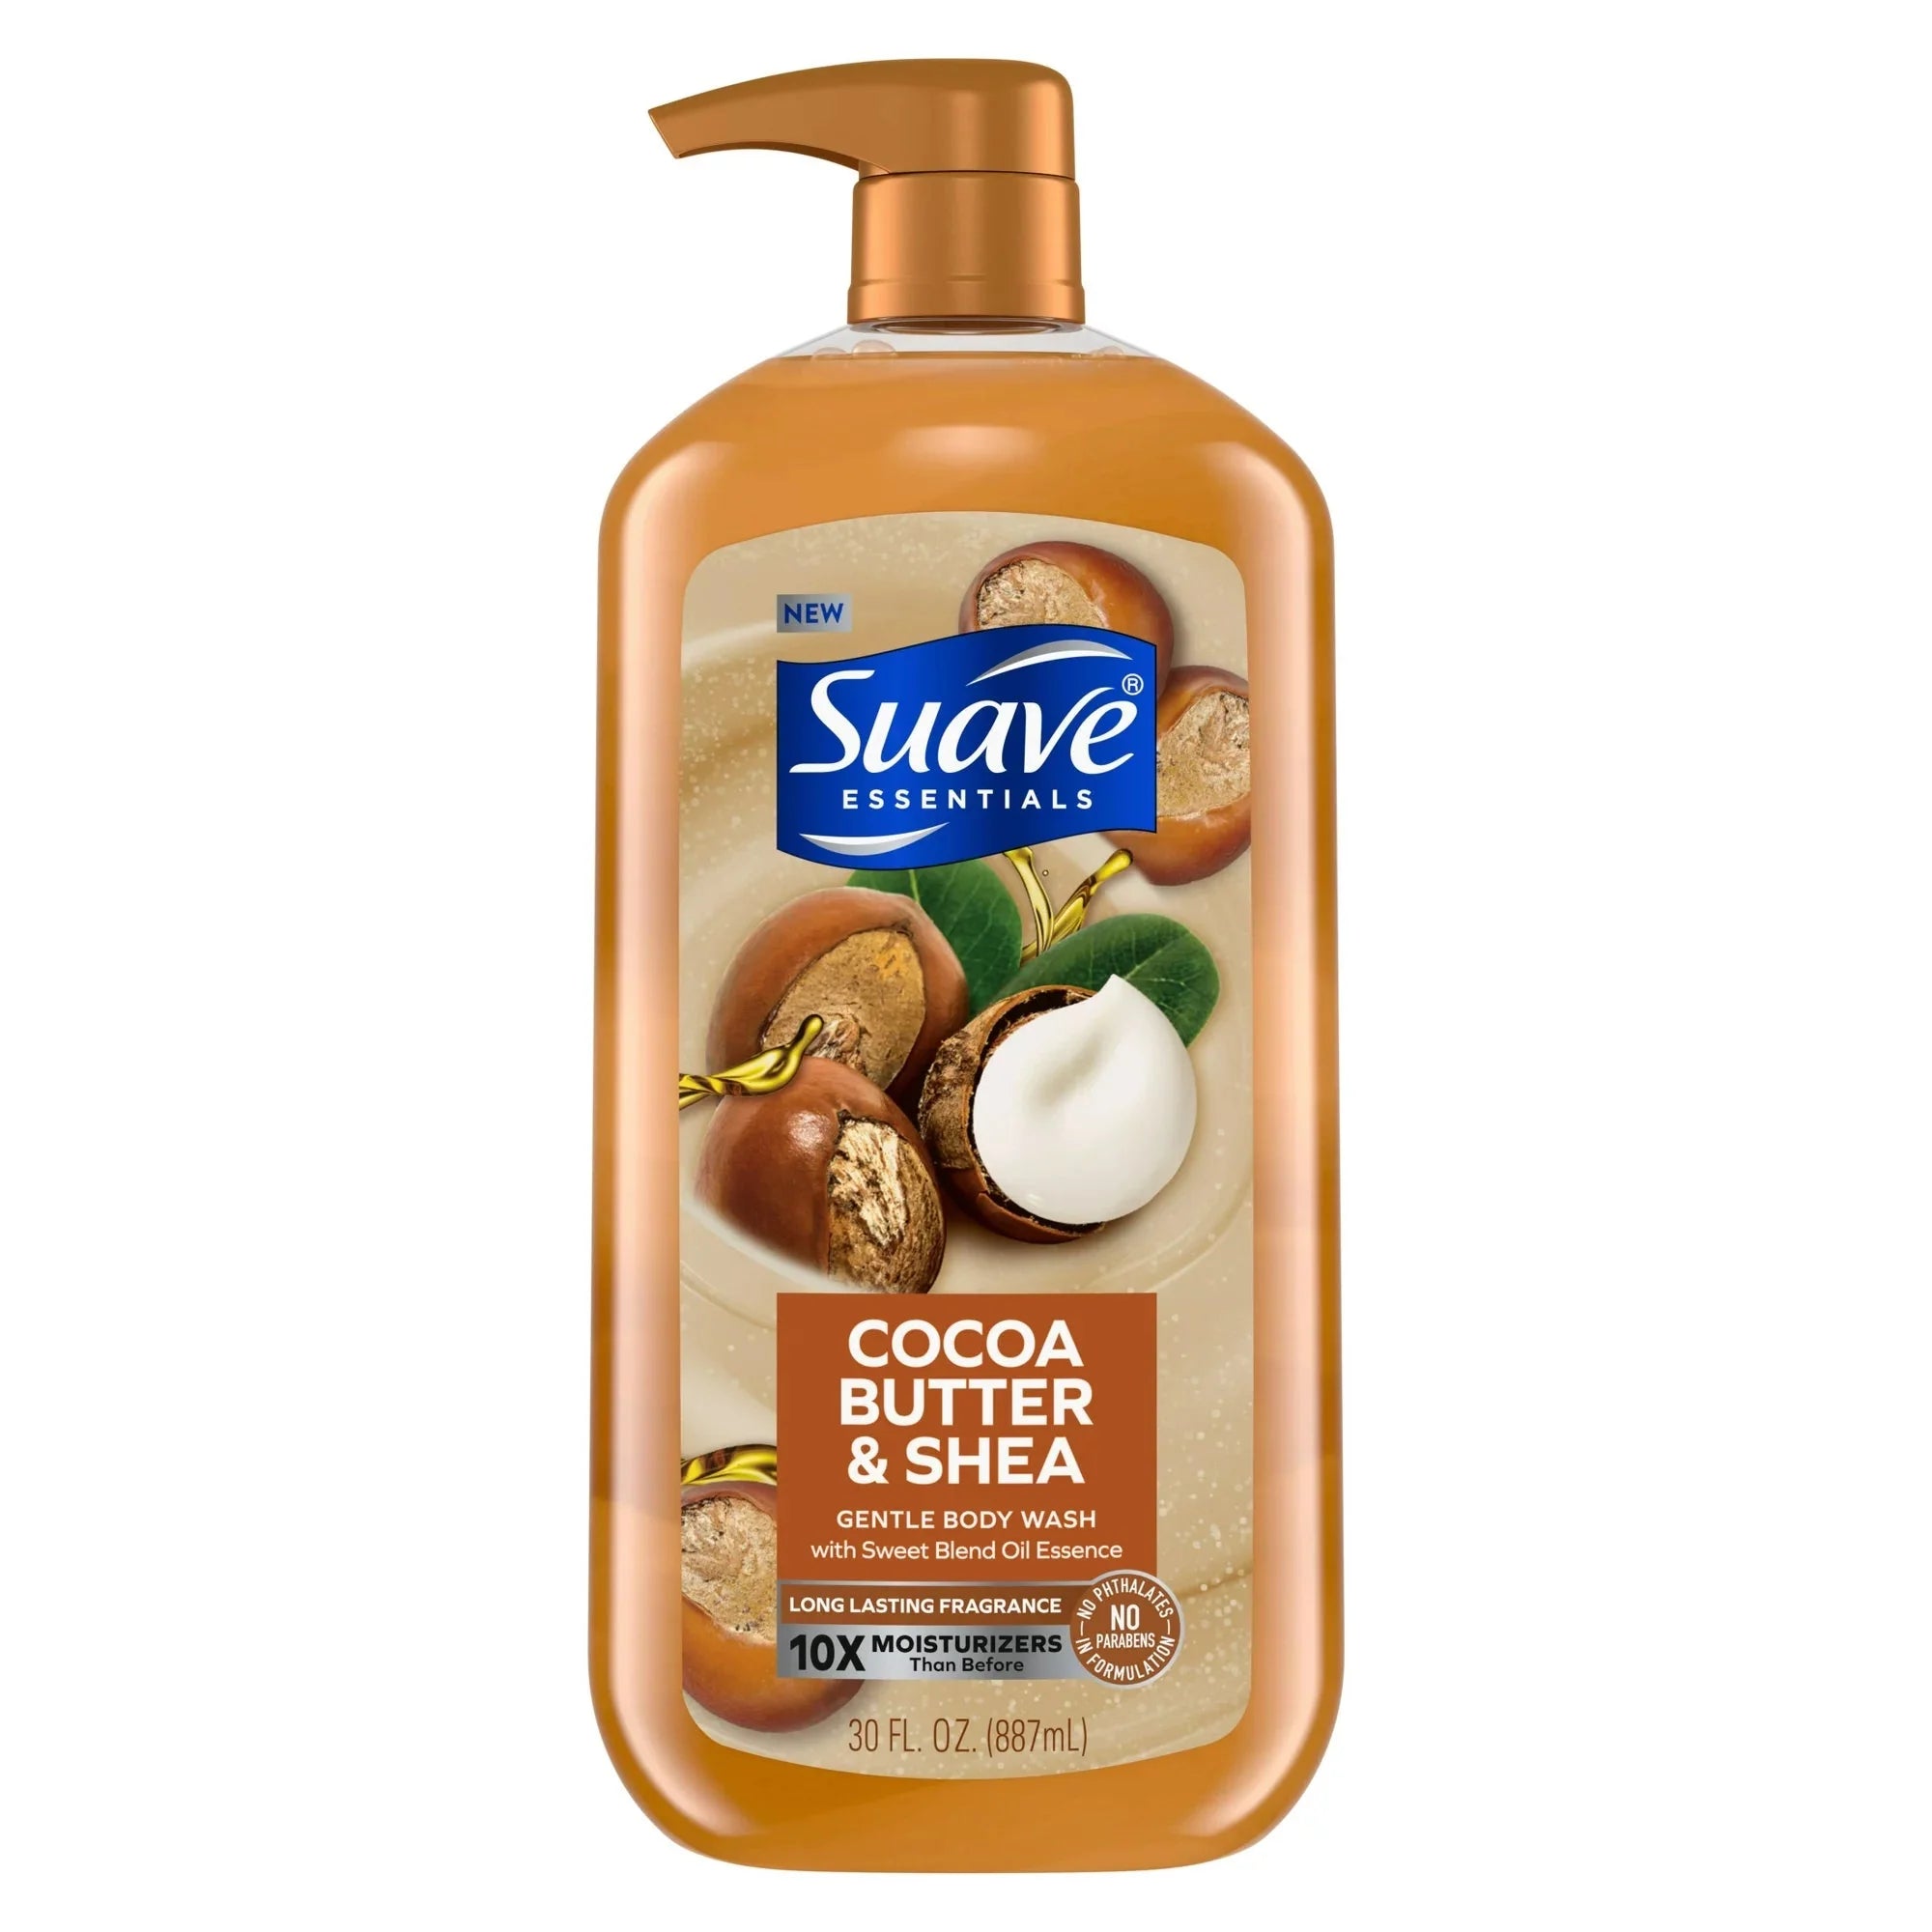 Wholesale prices with free shipping all over United States Suave Essentials Gentle Body Wash, Cocoa Butter & Shea, All Skin Types 30 oz - Steven Deals